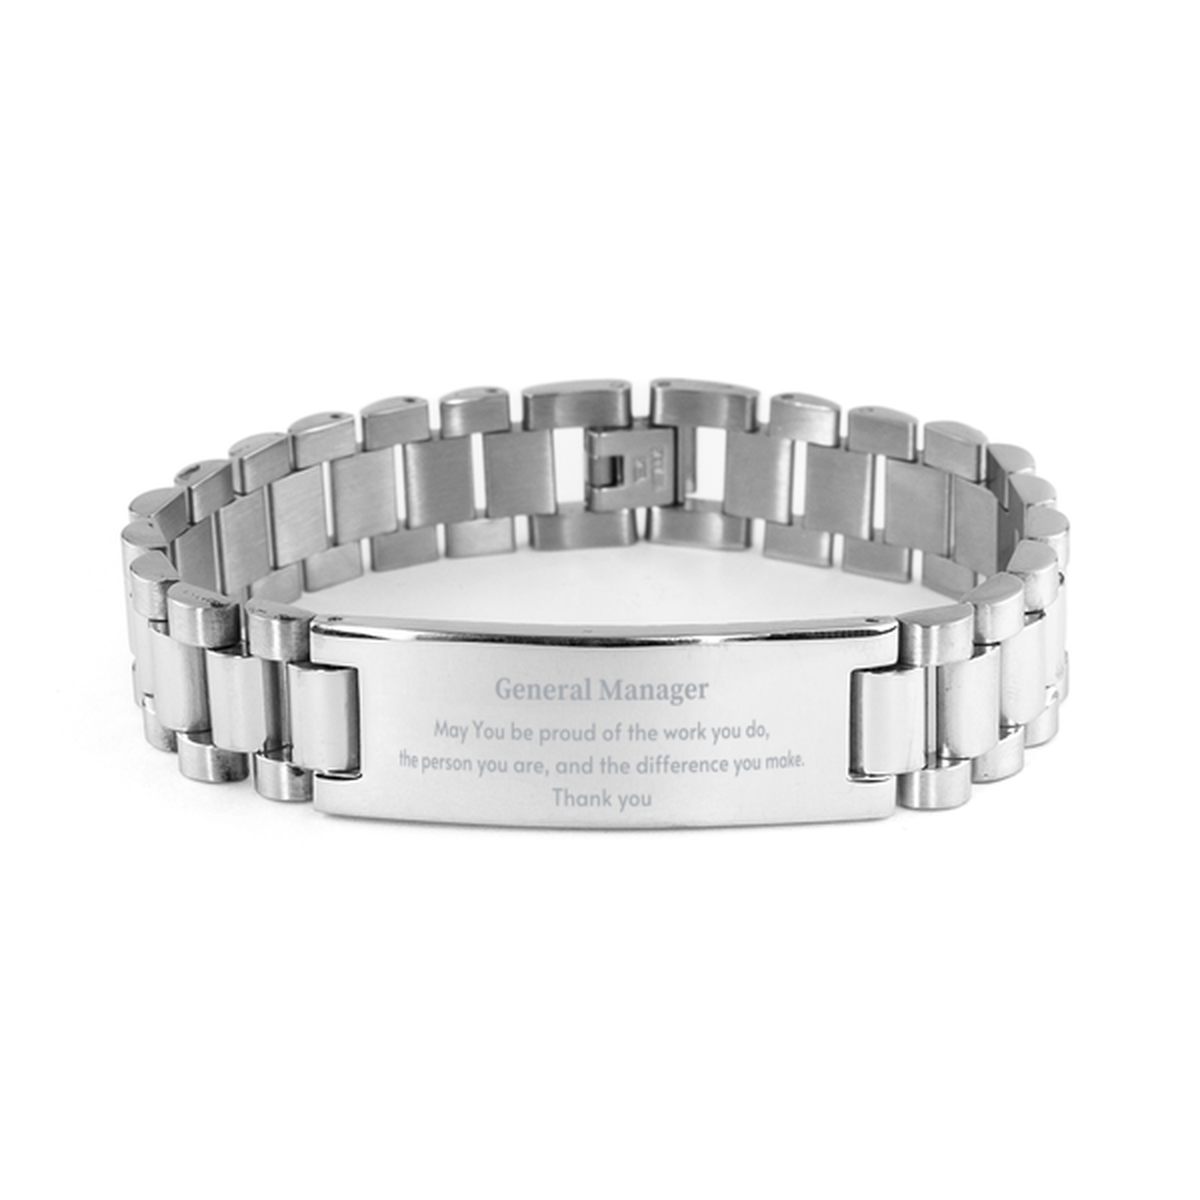 Heartwarming Ladder Stainless Steel Bracelet Retirement Coworkers Gifts for General Manager, General Manager May You be proud of the work you do, the person you are Gifts for Boss Men Women Friends